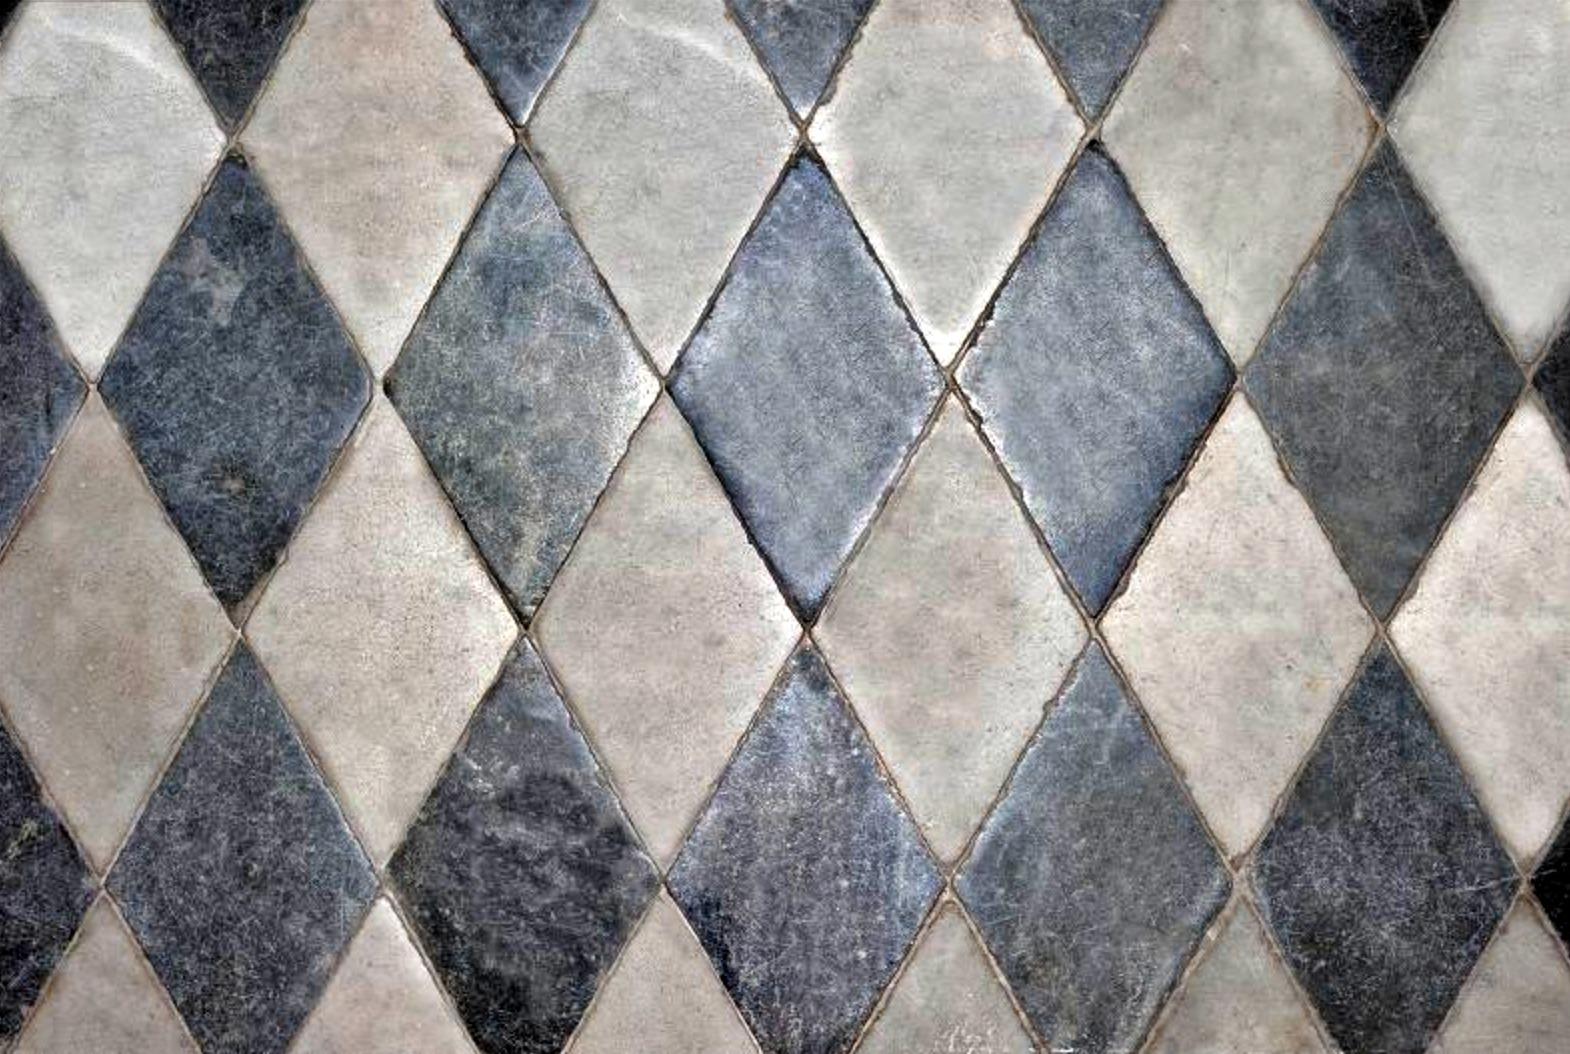 Carrara marble floor with symmetrical rhombus early 20th century

Floor reproduced in white of Carrara and Bardiglio or white of Carrara and black marquina,
Copy of the sixteenth-century floor of the Church of s. Giuseppe Di Pietrasanta